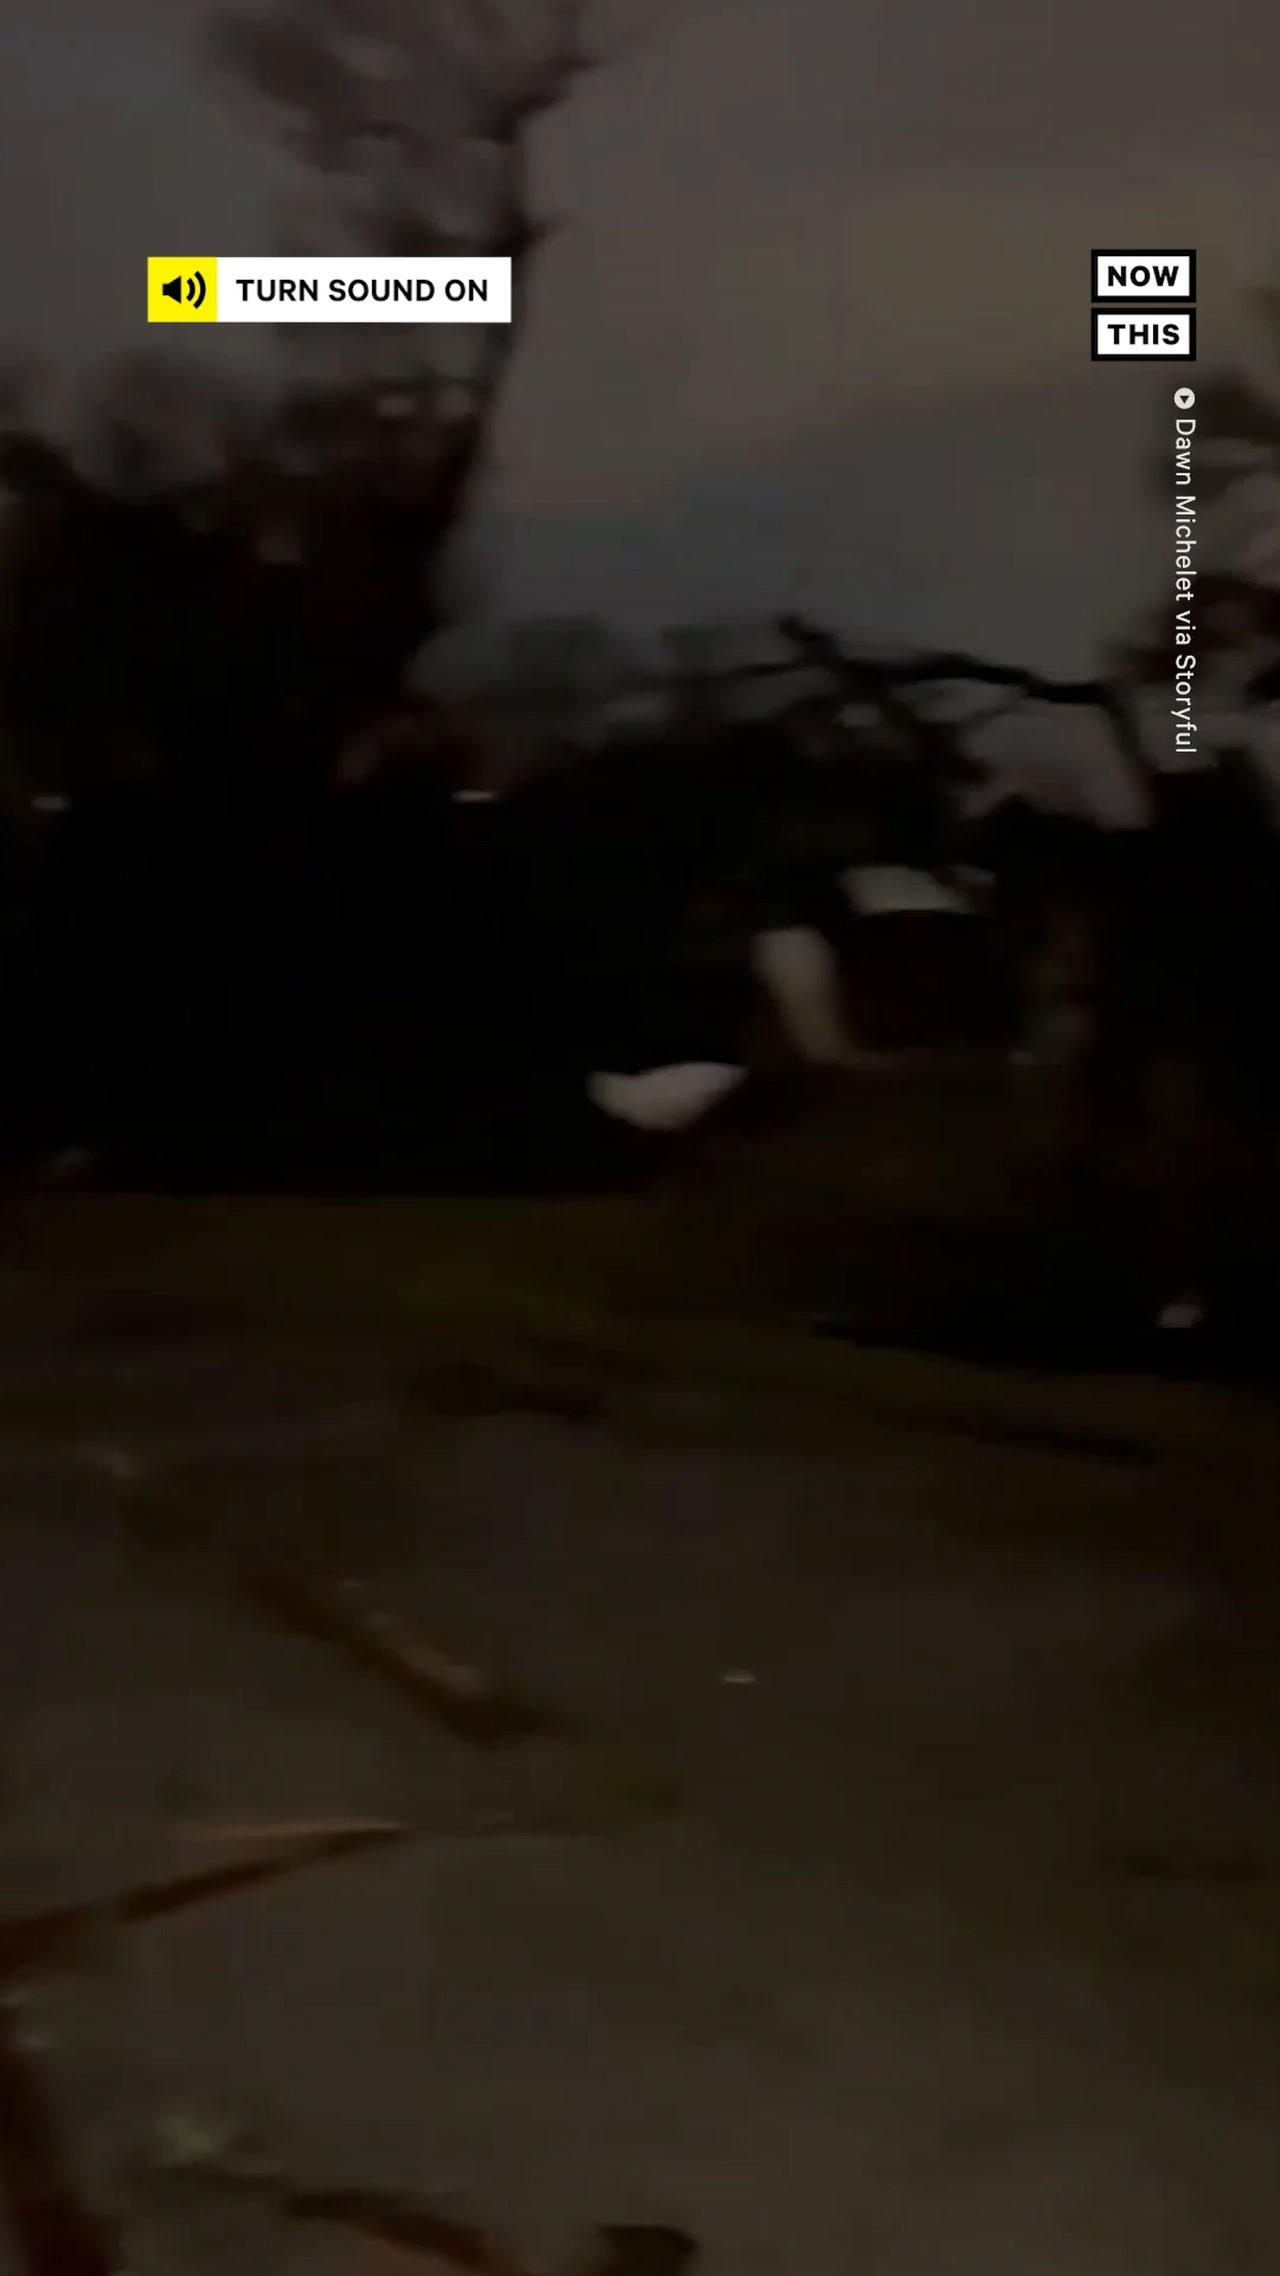 New Orleans Hit With Most Intense Tornado Since 2017